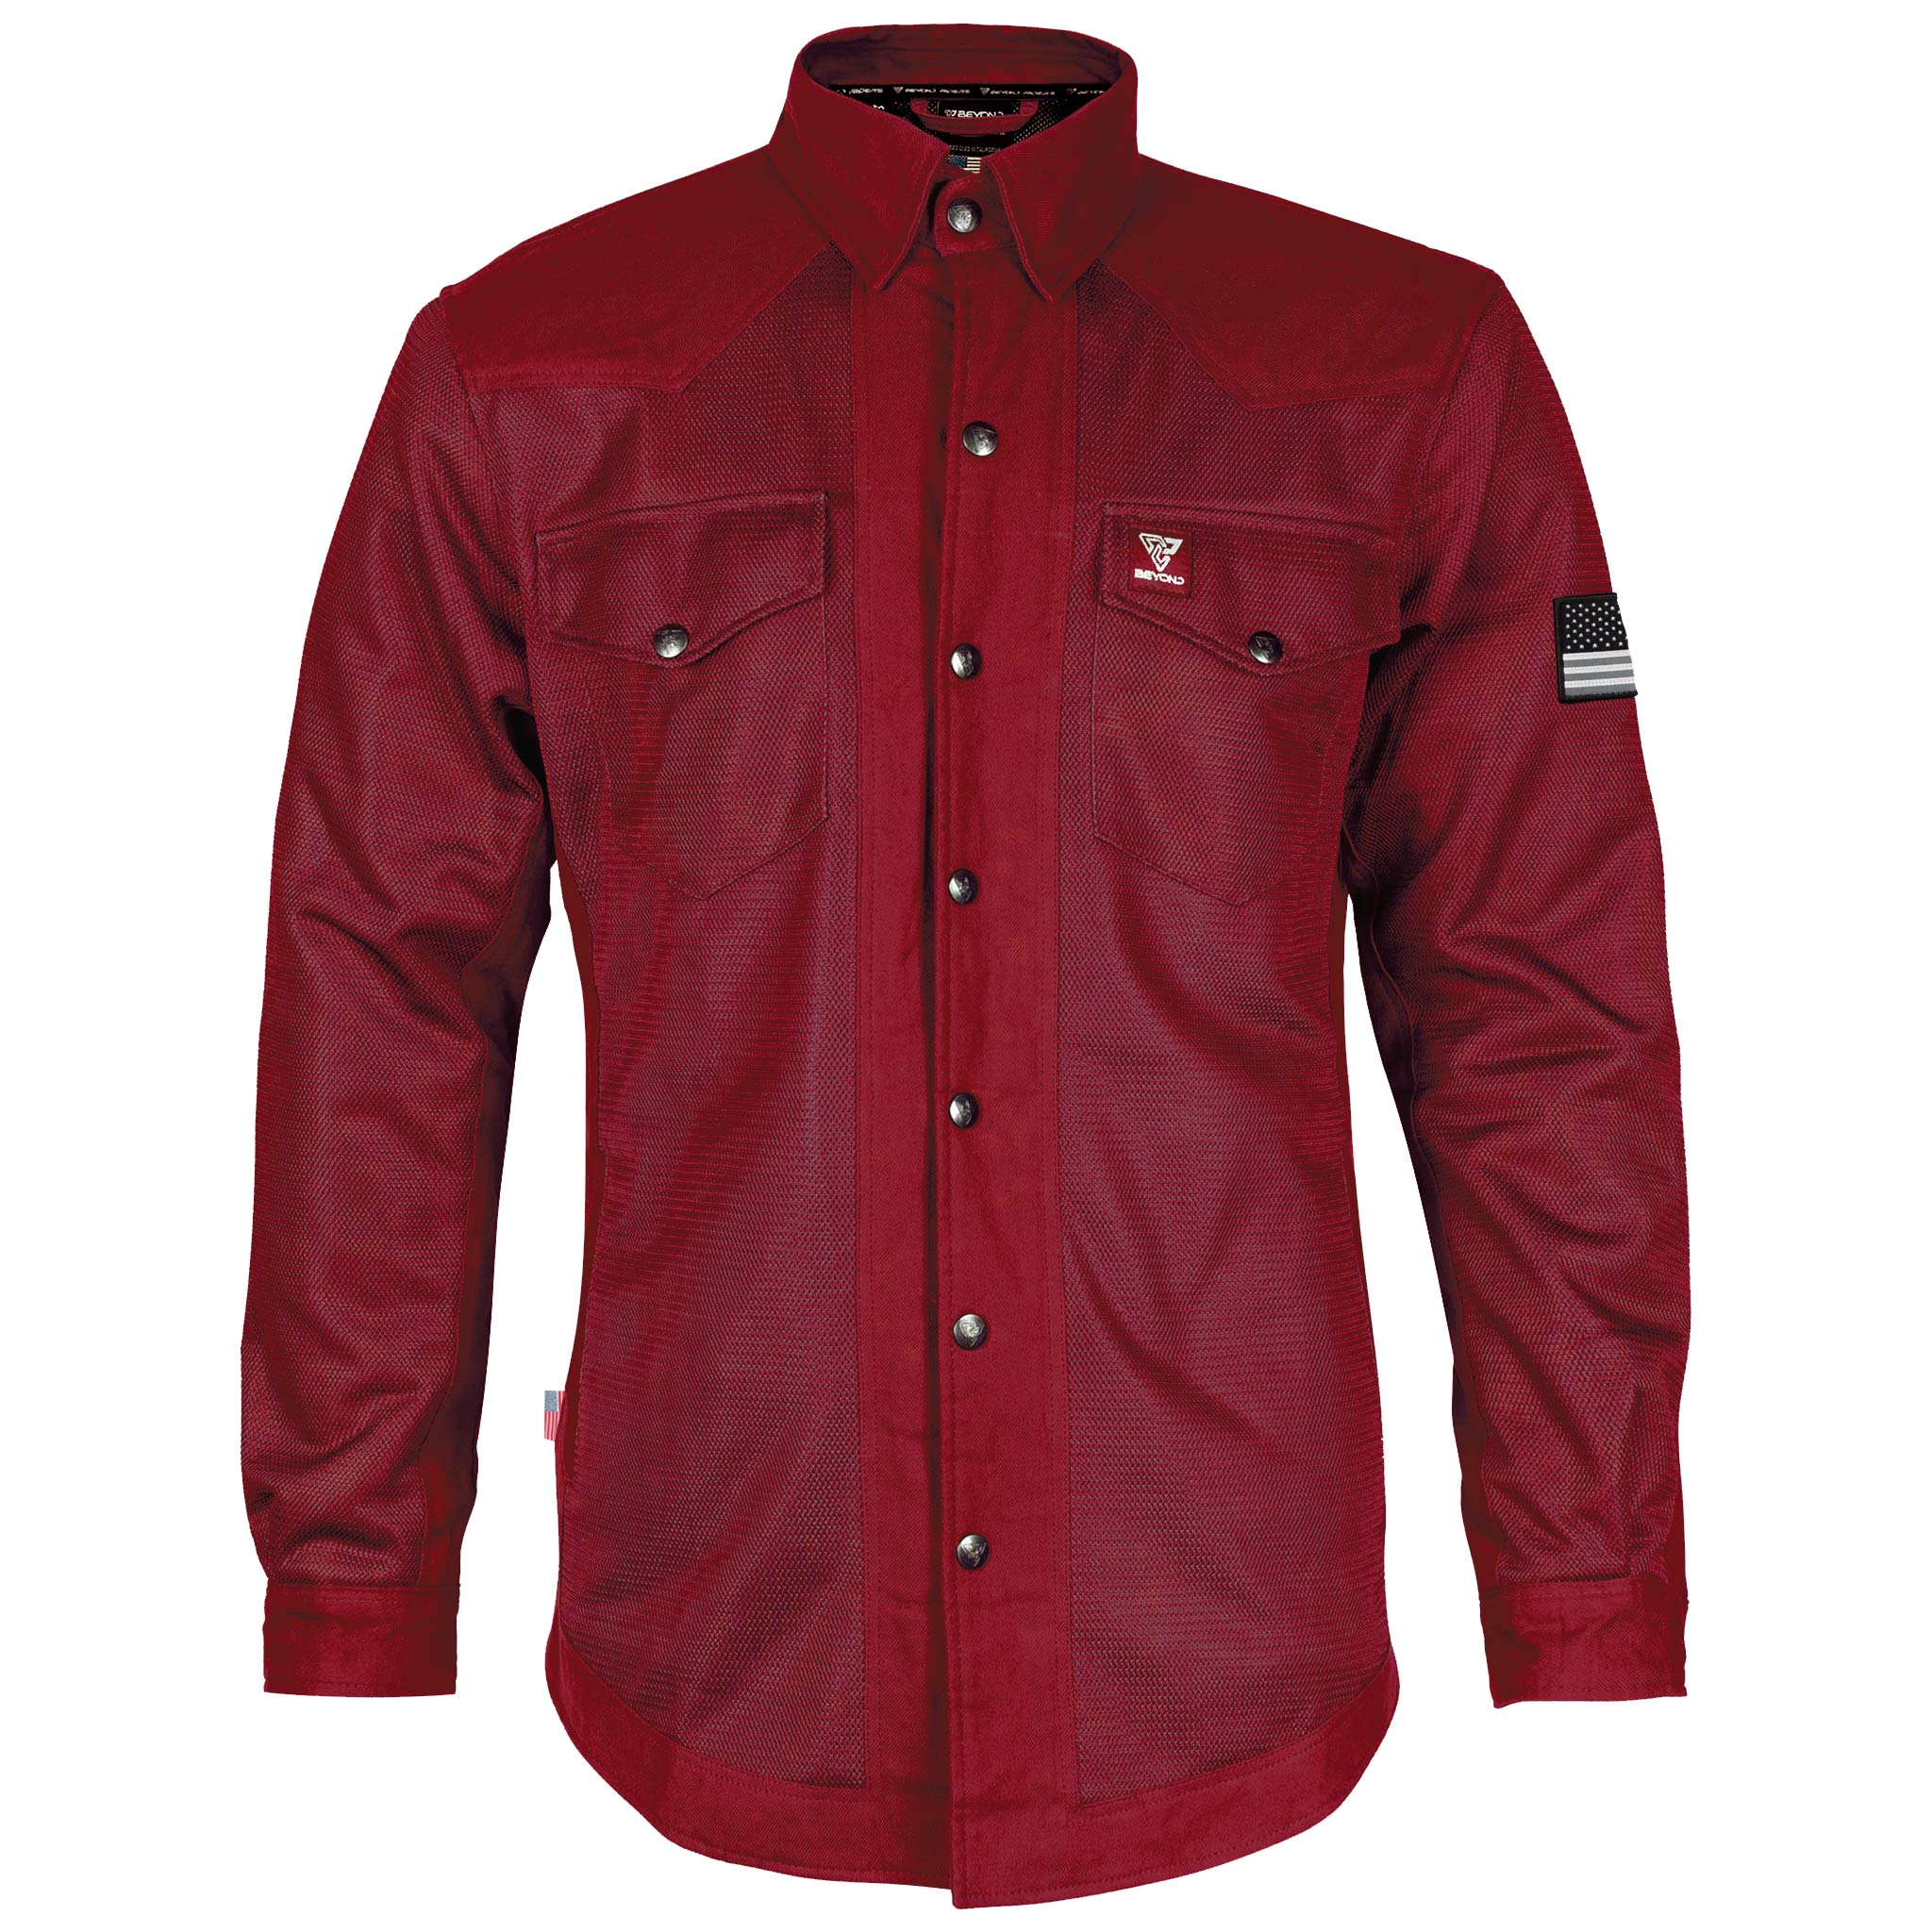 Summer-Mesh-Shirt-for-Men-in-Red-Maroon-Solid-Front